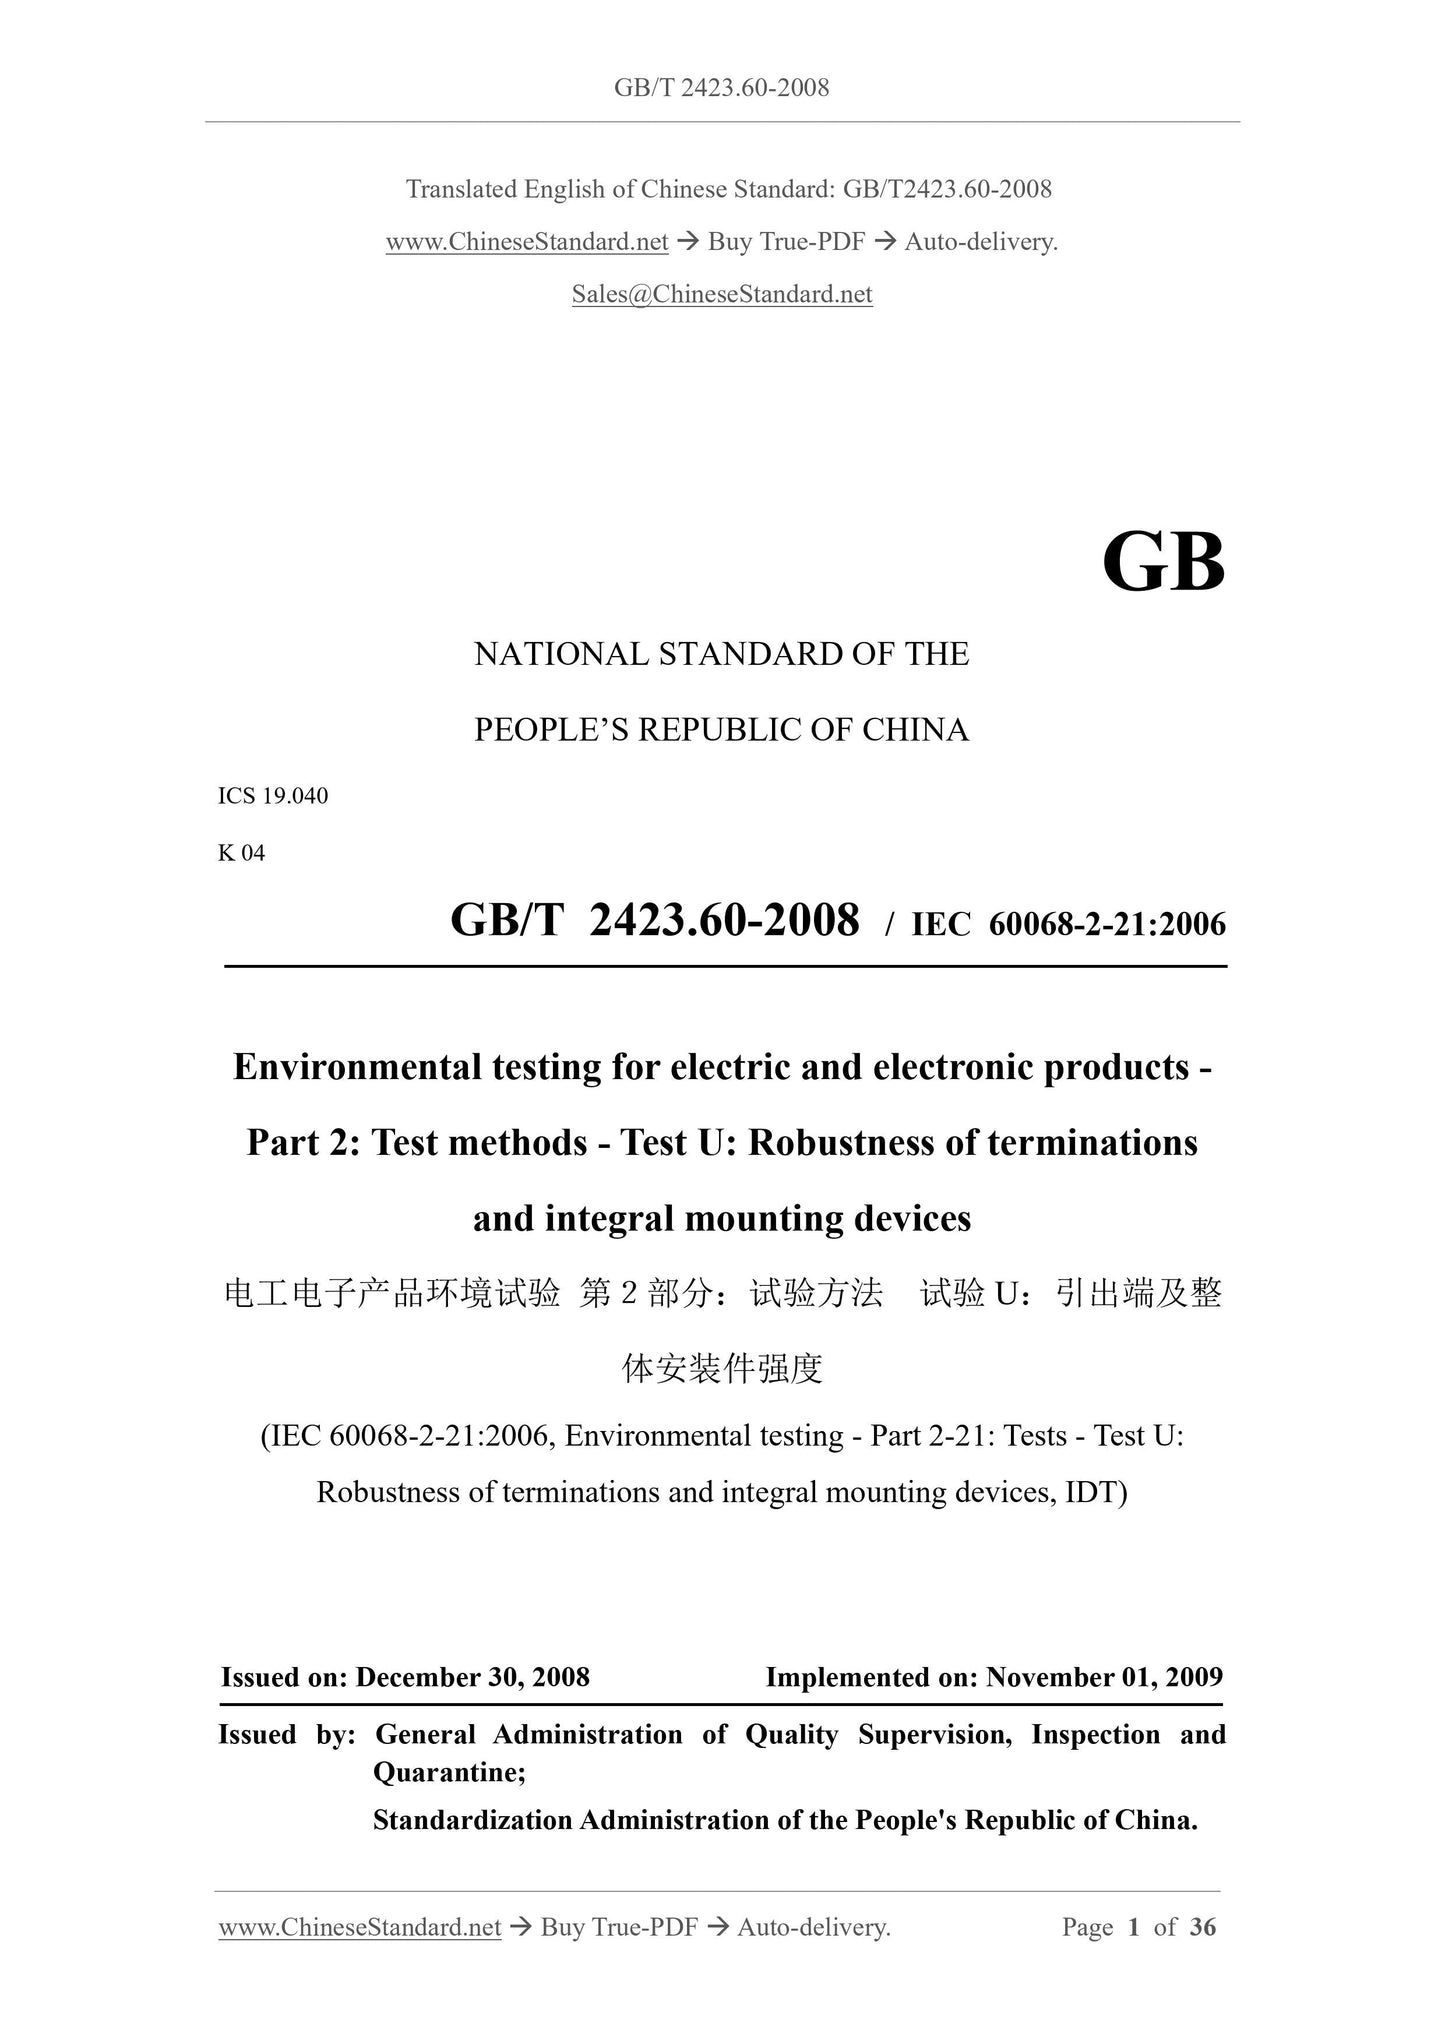 GB/T 2423.60-2008 Page 1